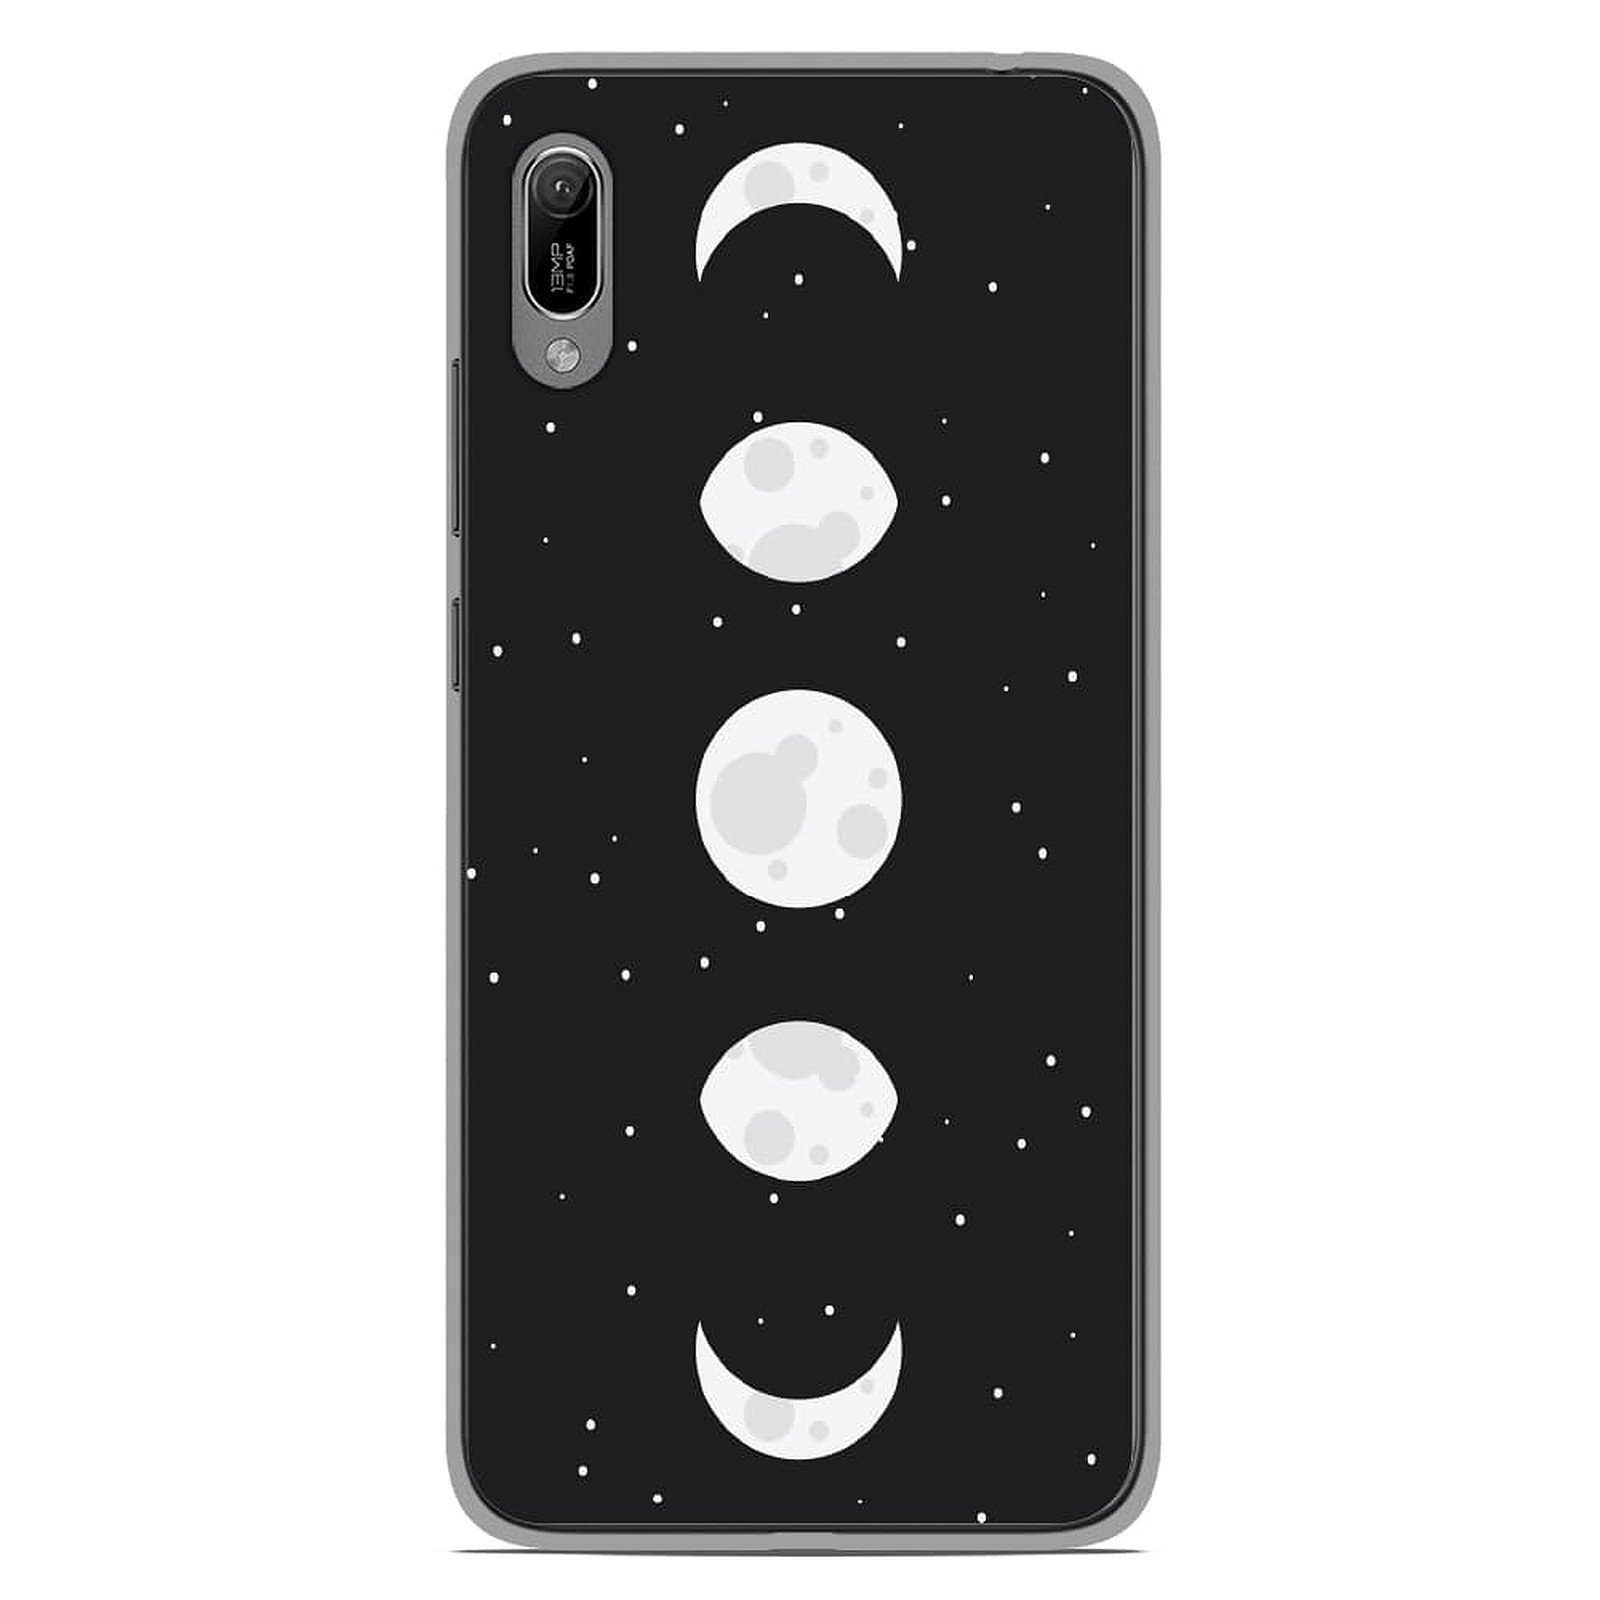 1001 Coques Coque silicone gel Huawei Y6 2019 motif Phase de Lune - Coque telephone 1001Coques